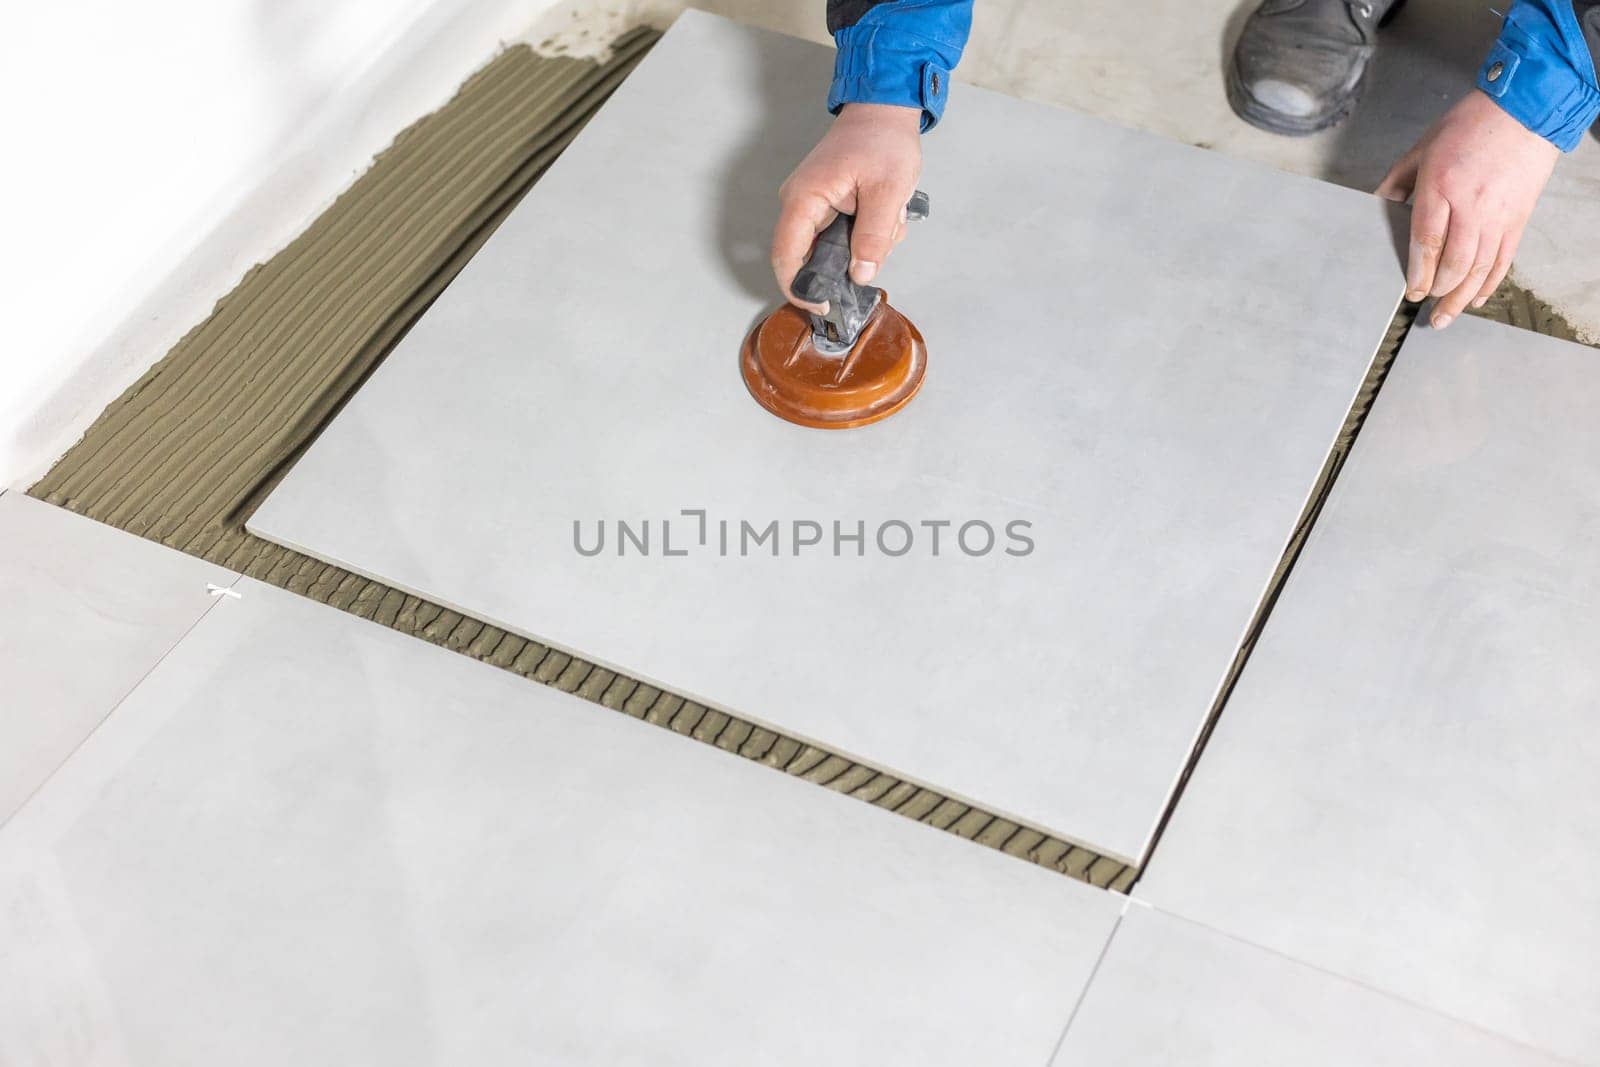 Tiler worker placing or tiling gray ceramic tile in position over adhesive glue with lash tile leveling system, renovation or recontruction, concept of building